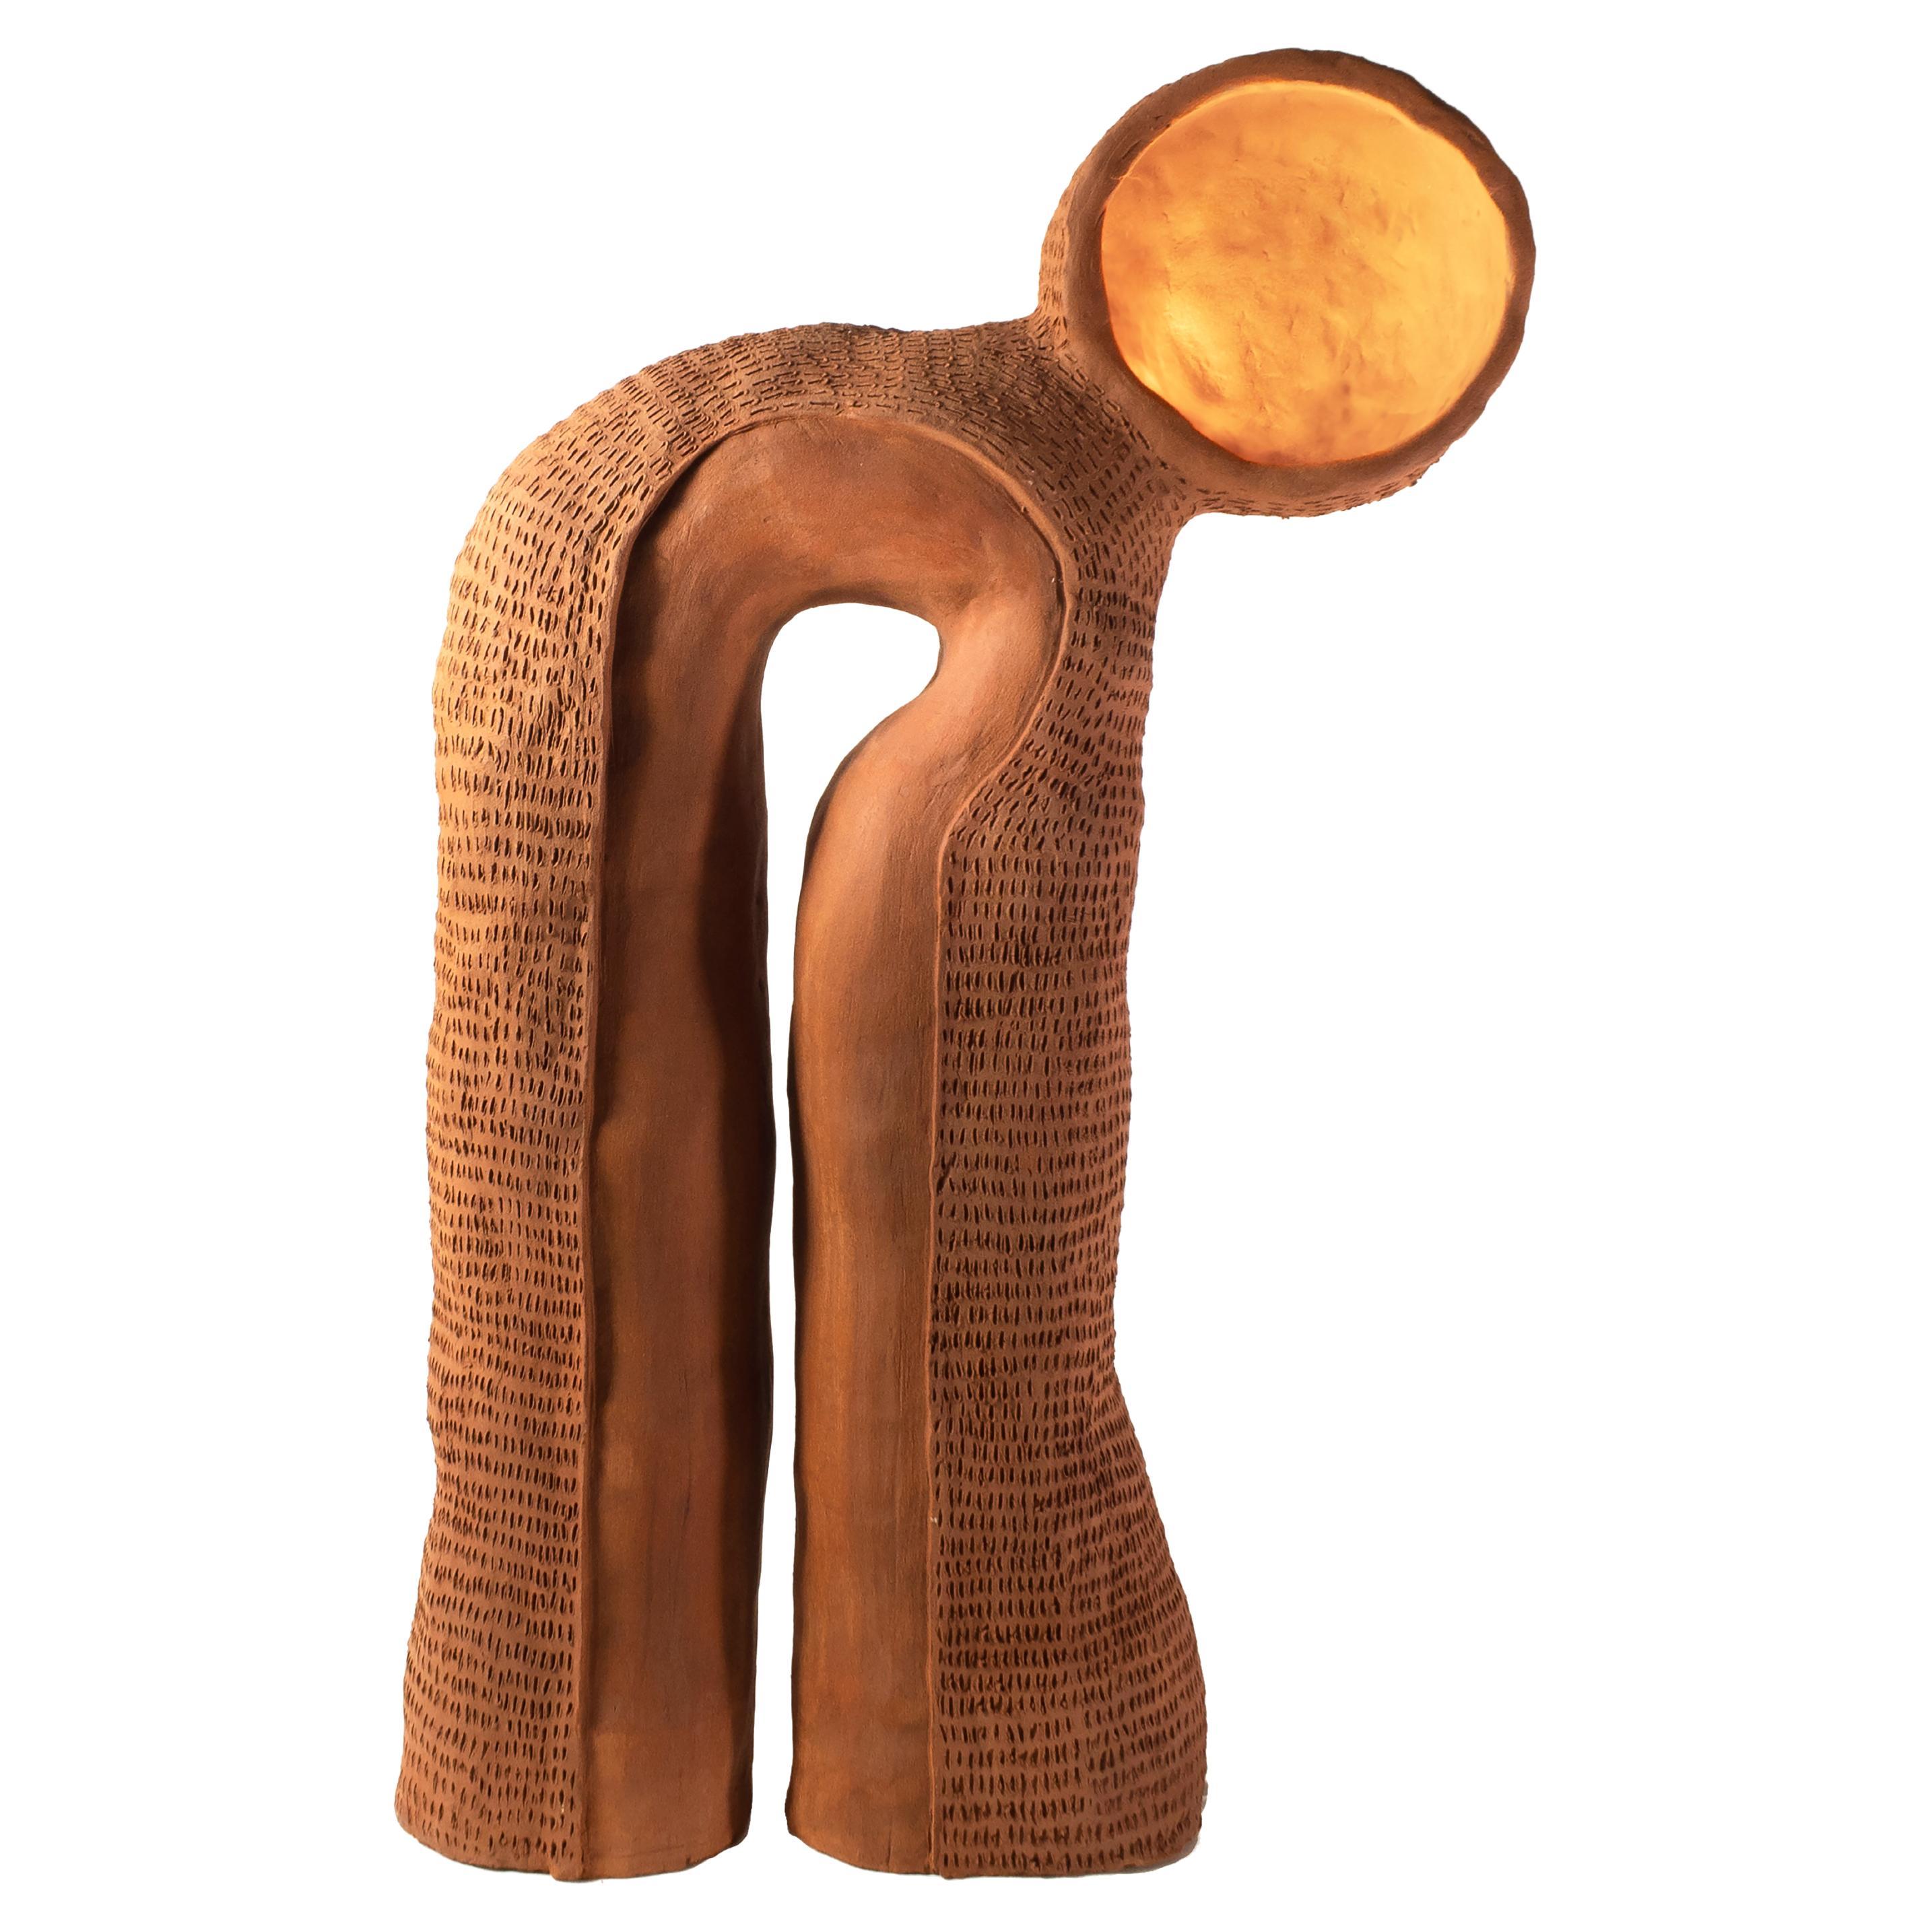 Contemporary Earthy Eye table lamp Handcrafted by Jan Ernst